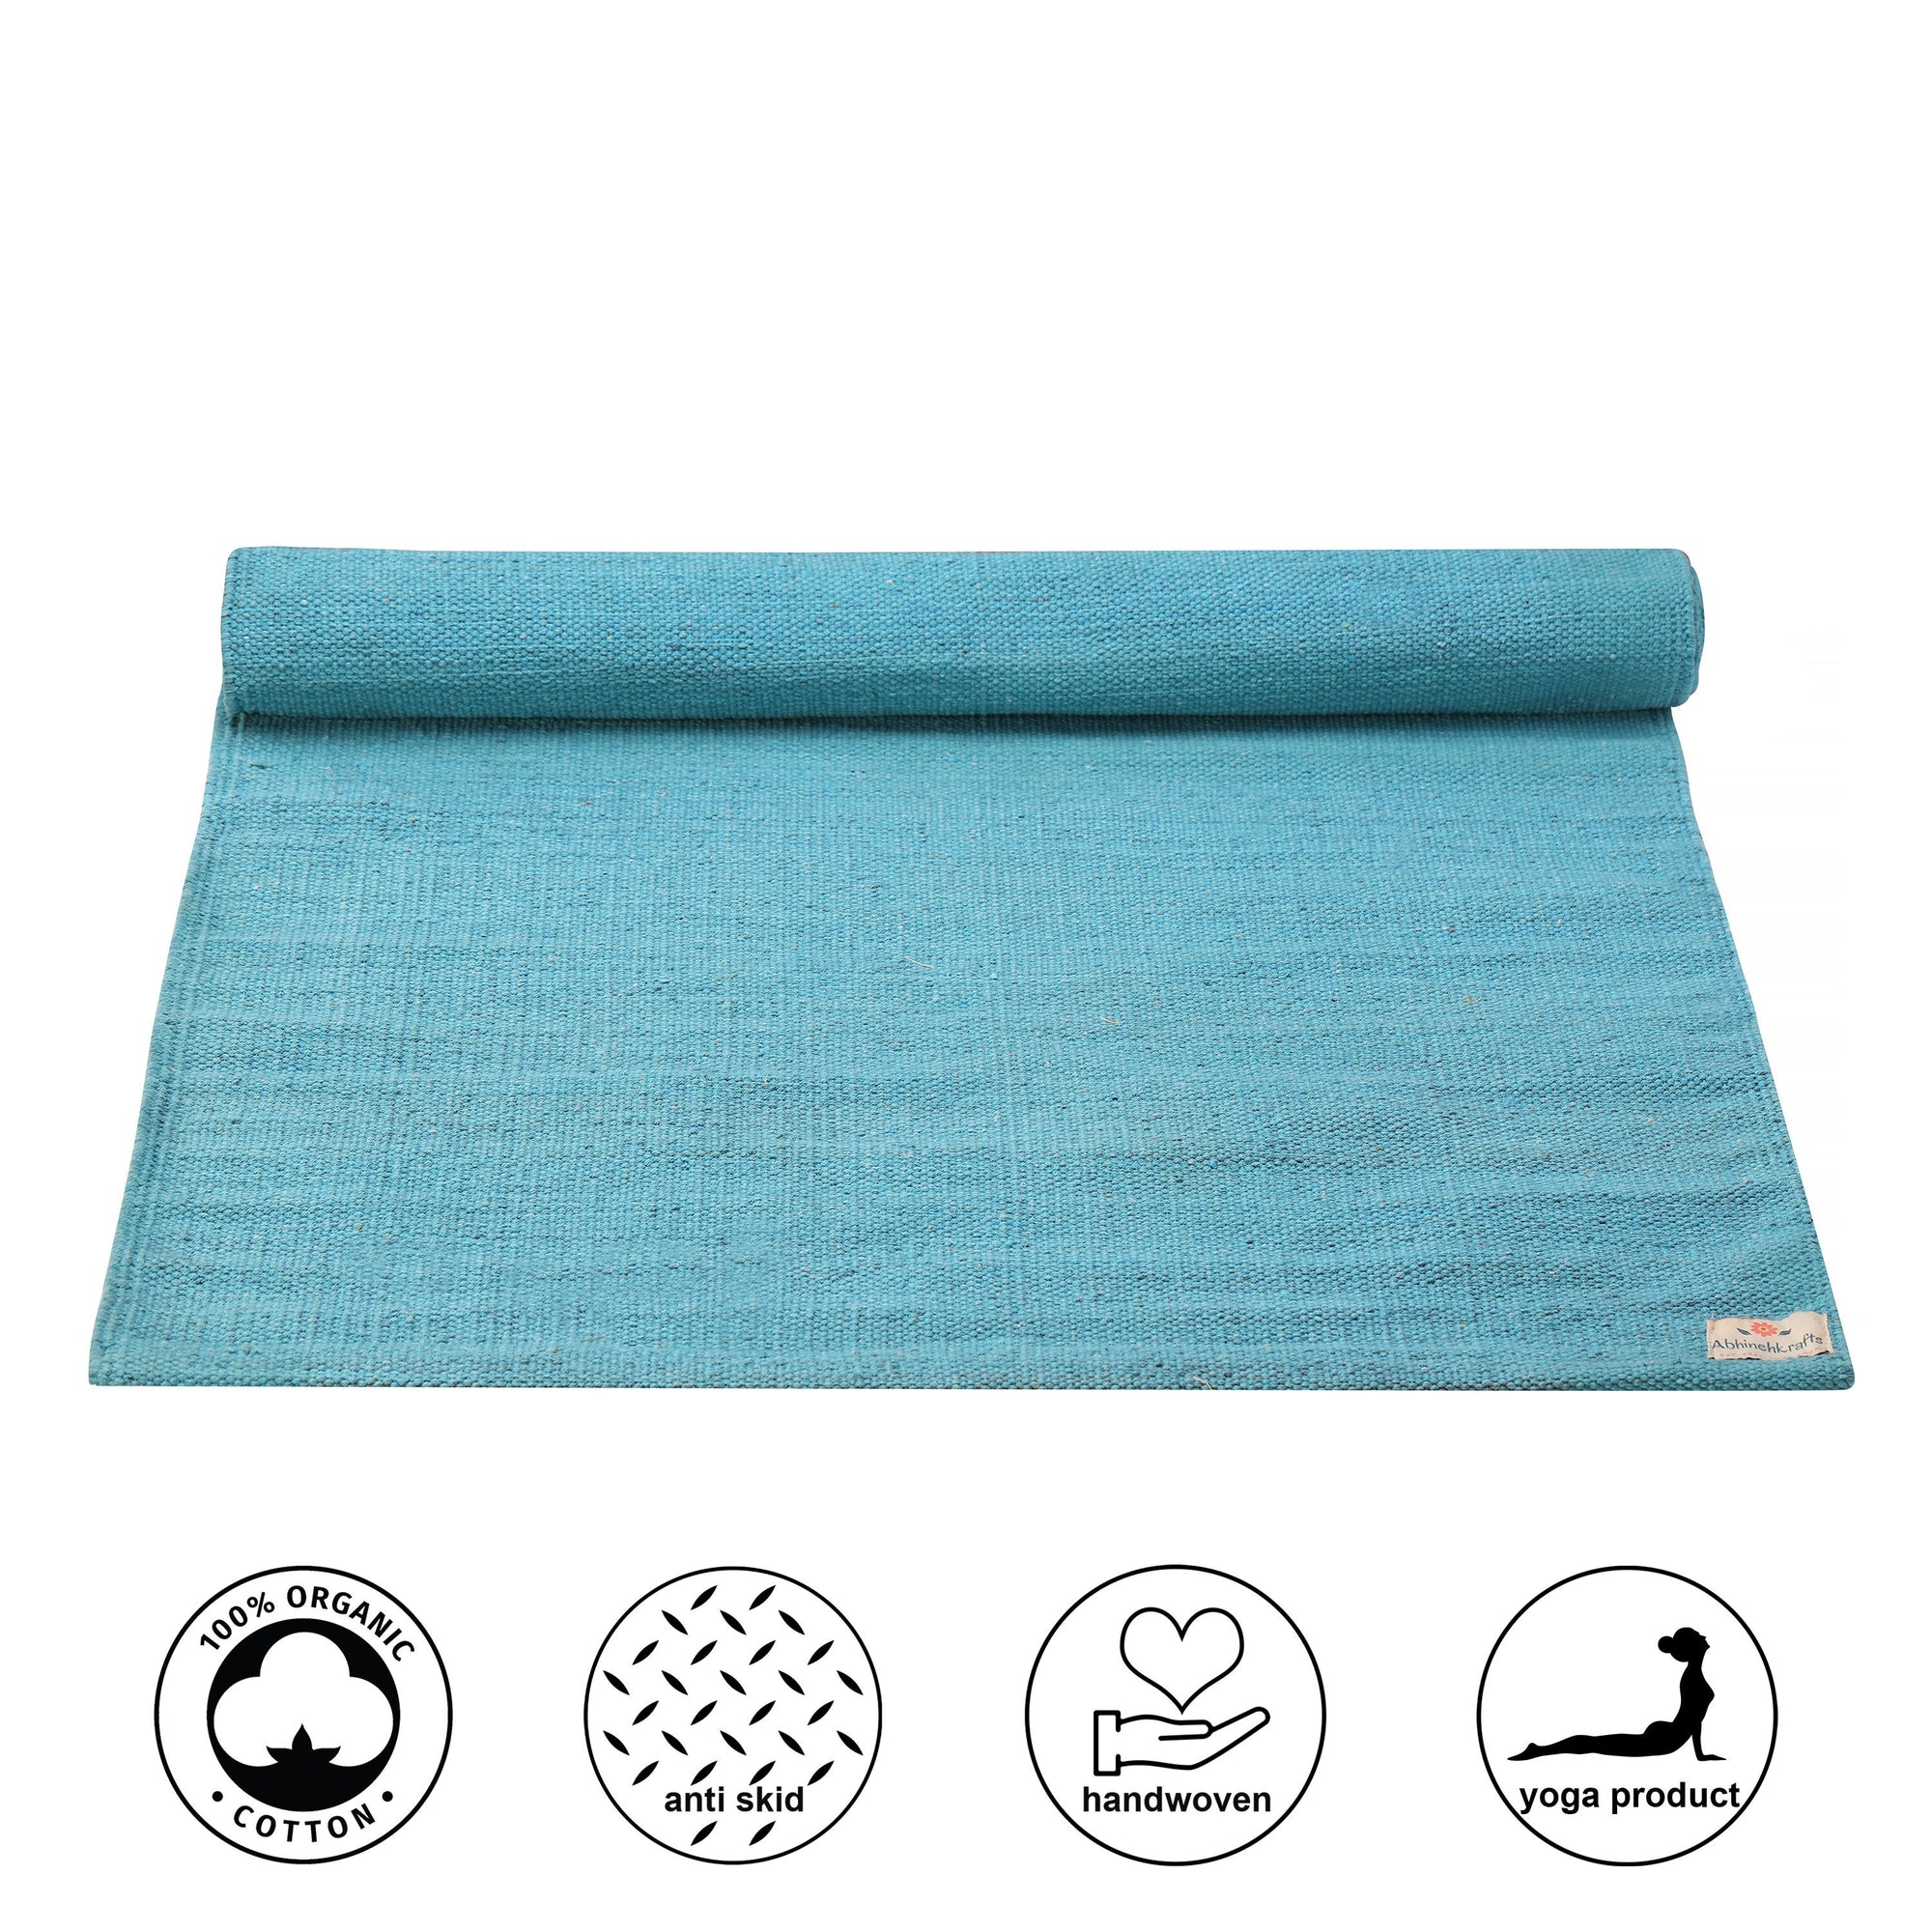 Handmade Yoga Mat, Made Of Old Recycled Cotton Sari Cloth And Used For  Exercise Al1013, Yoga Mat, Rag Rug, Eco-friendly Mat - Buy India Wholesale Yoga  Mat $6